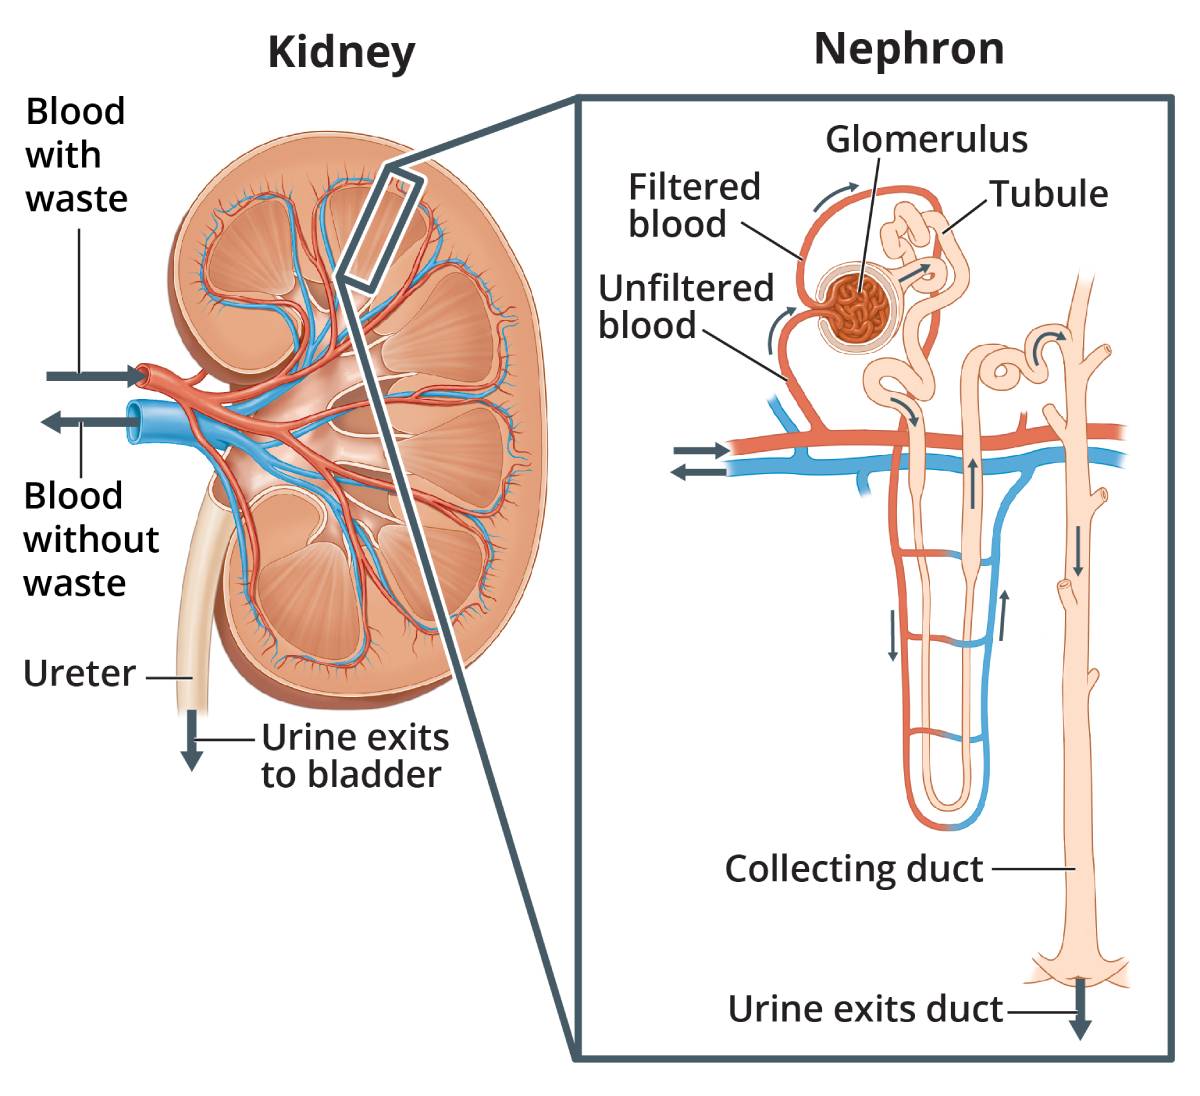 Two illustrations. A human kidney, with arrows showing where blood with waste enters the kidney and blood without waste leaves the kidney. Wastes and extra water leave the kidney through the ureter to the bladder as urine. An inset image shows a microscopic view of a nephron, one of the tiny units in the kidney that filters the blood. Labels point to the glomerulus, tubule, and the duct that collects the extra waste and water that leave the body as urine. Arrows show the route the blood takes through the nephron.